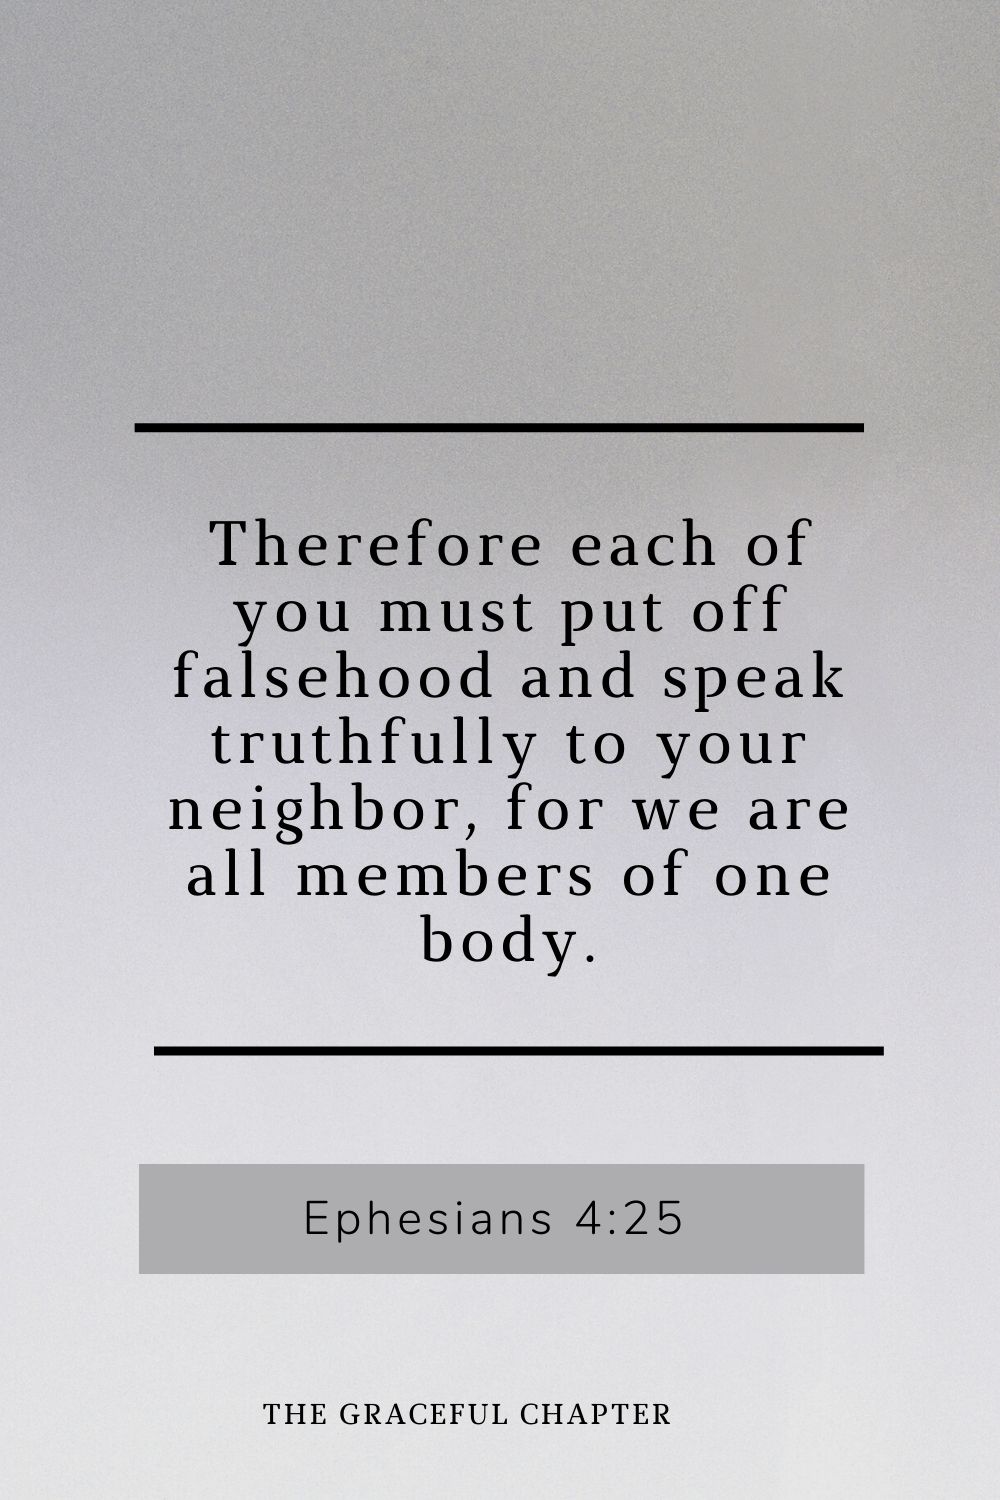 Therefore each of you must put off falsehood and speak truthfully to your neighbor, for we are all members of one body. Ephesians 4:25